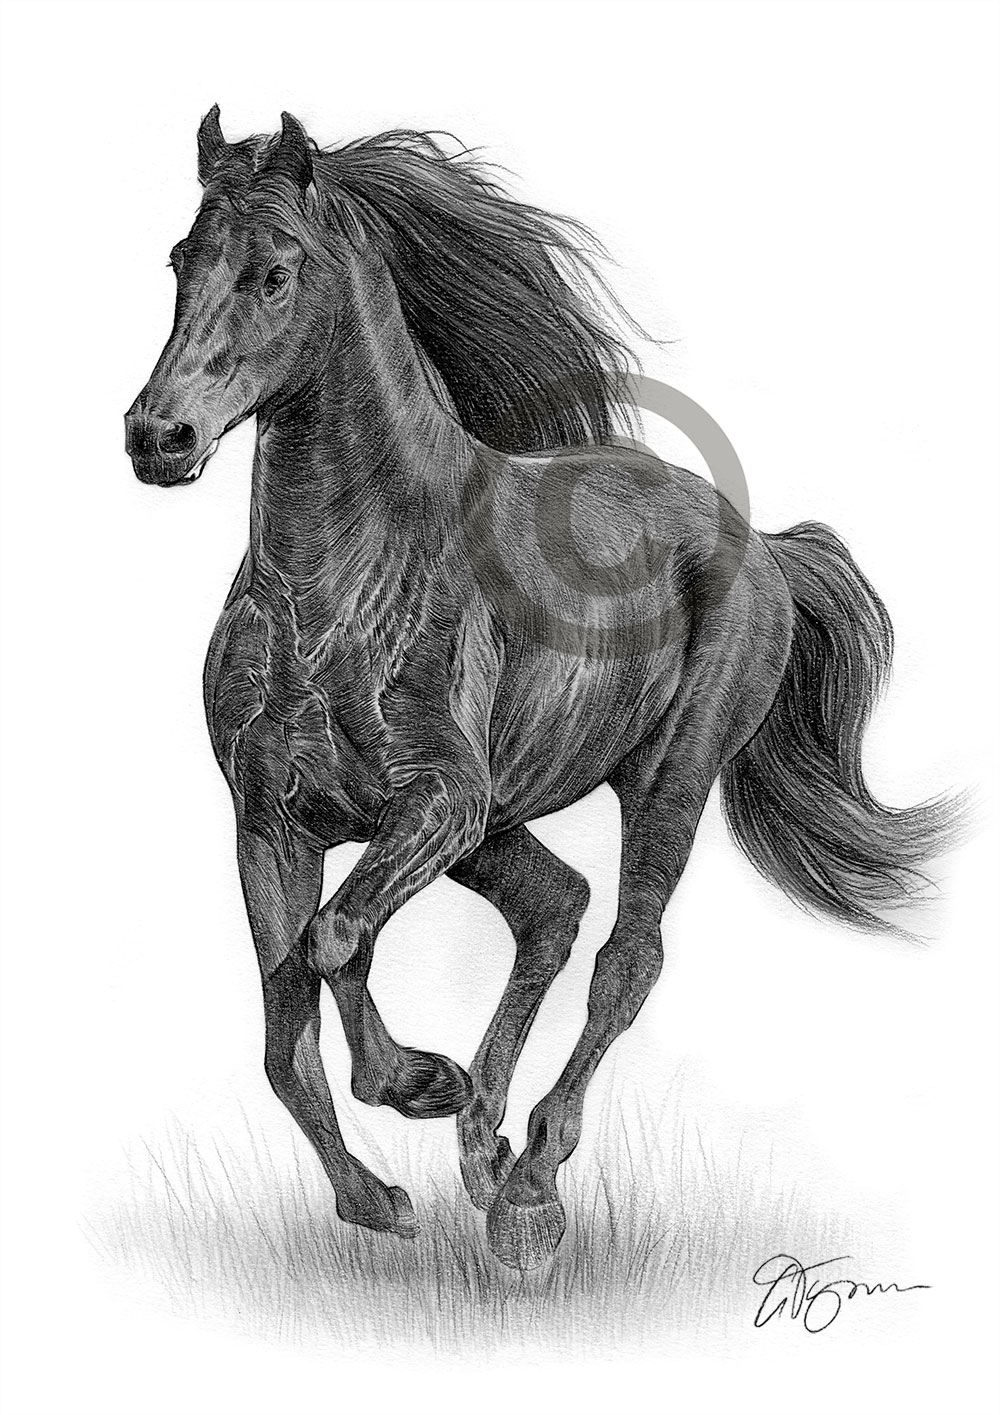 Pencil drawing of a friesian horse by artist Gary Tymon